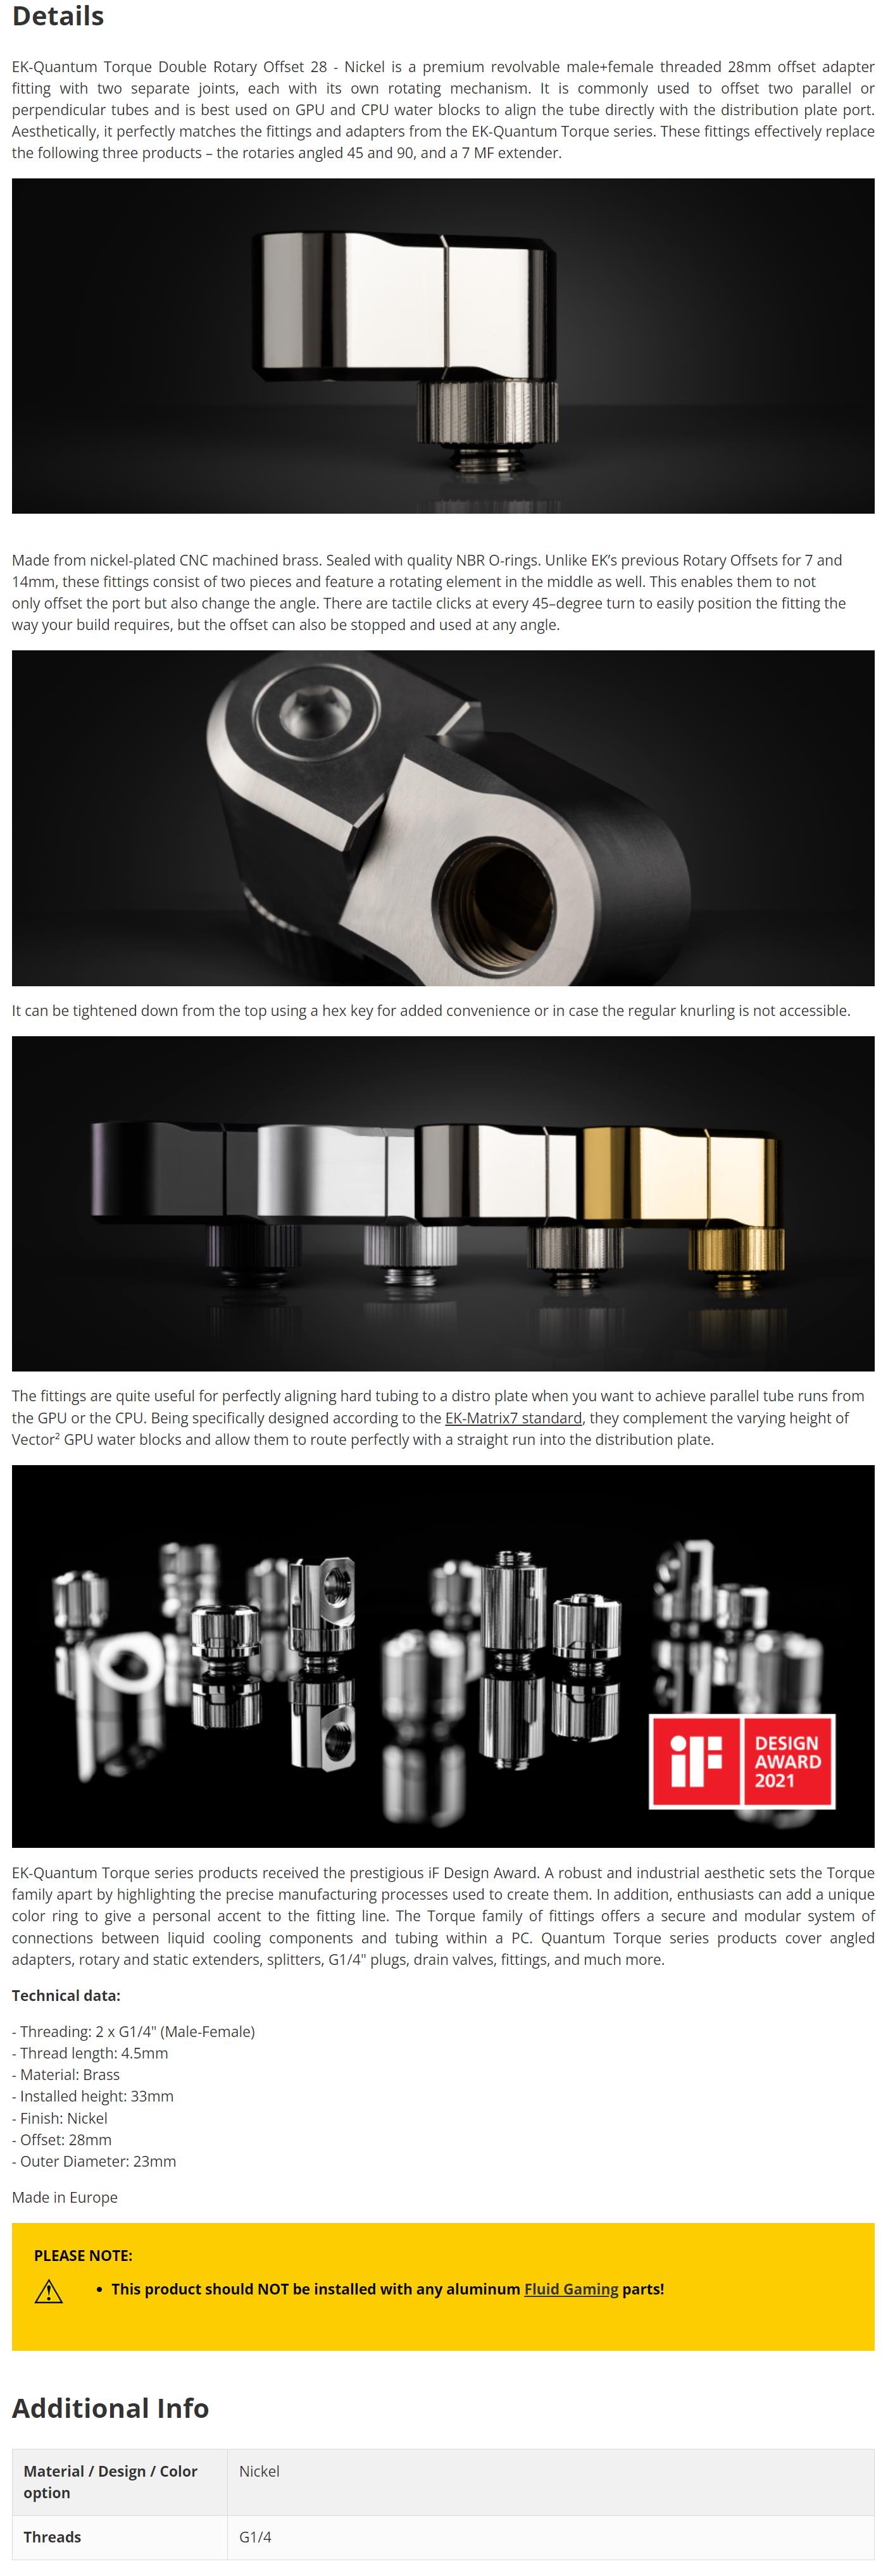 A large marketing image providing additional information about the product EK Quantum Torque Double Rotary Offset 28 - Nickel - Additional alt info not provided